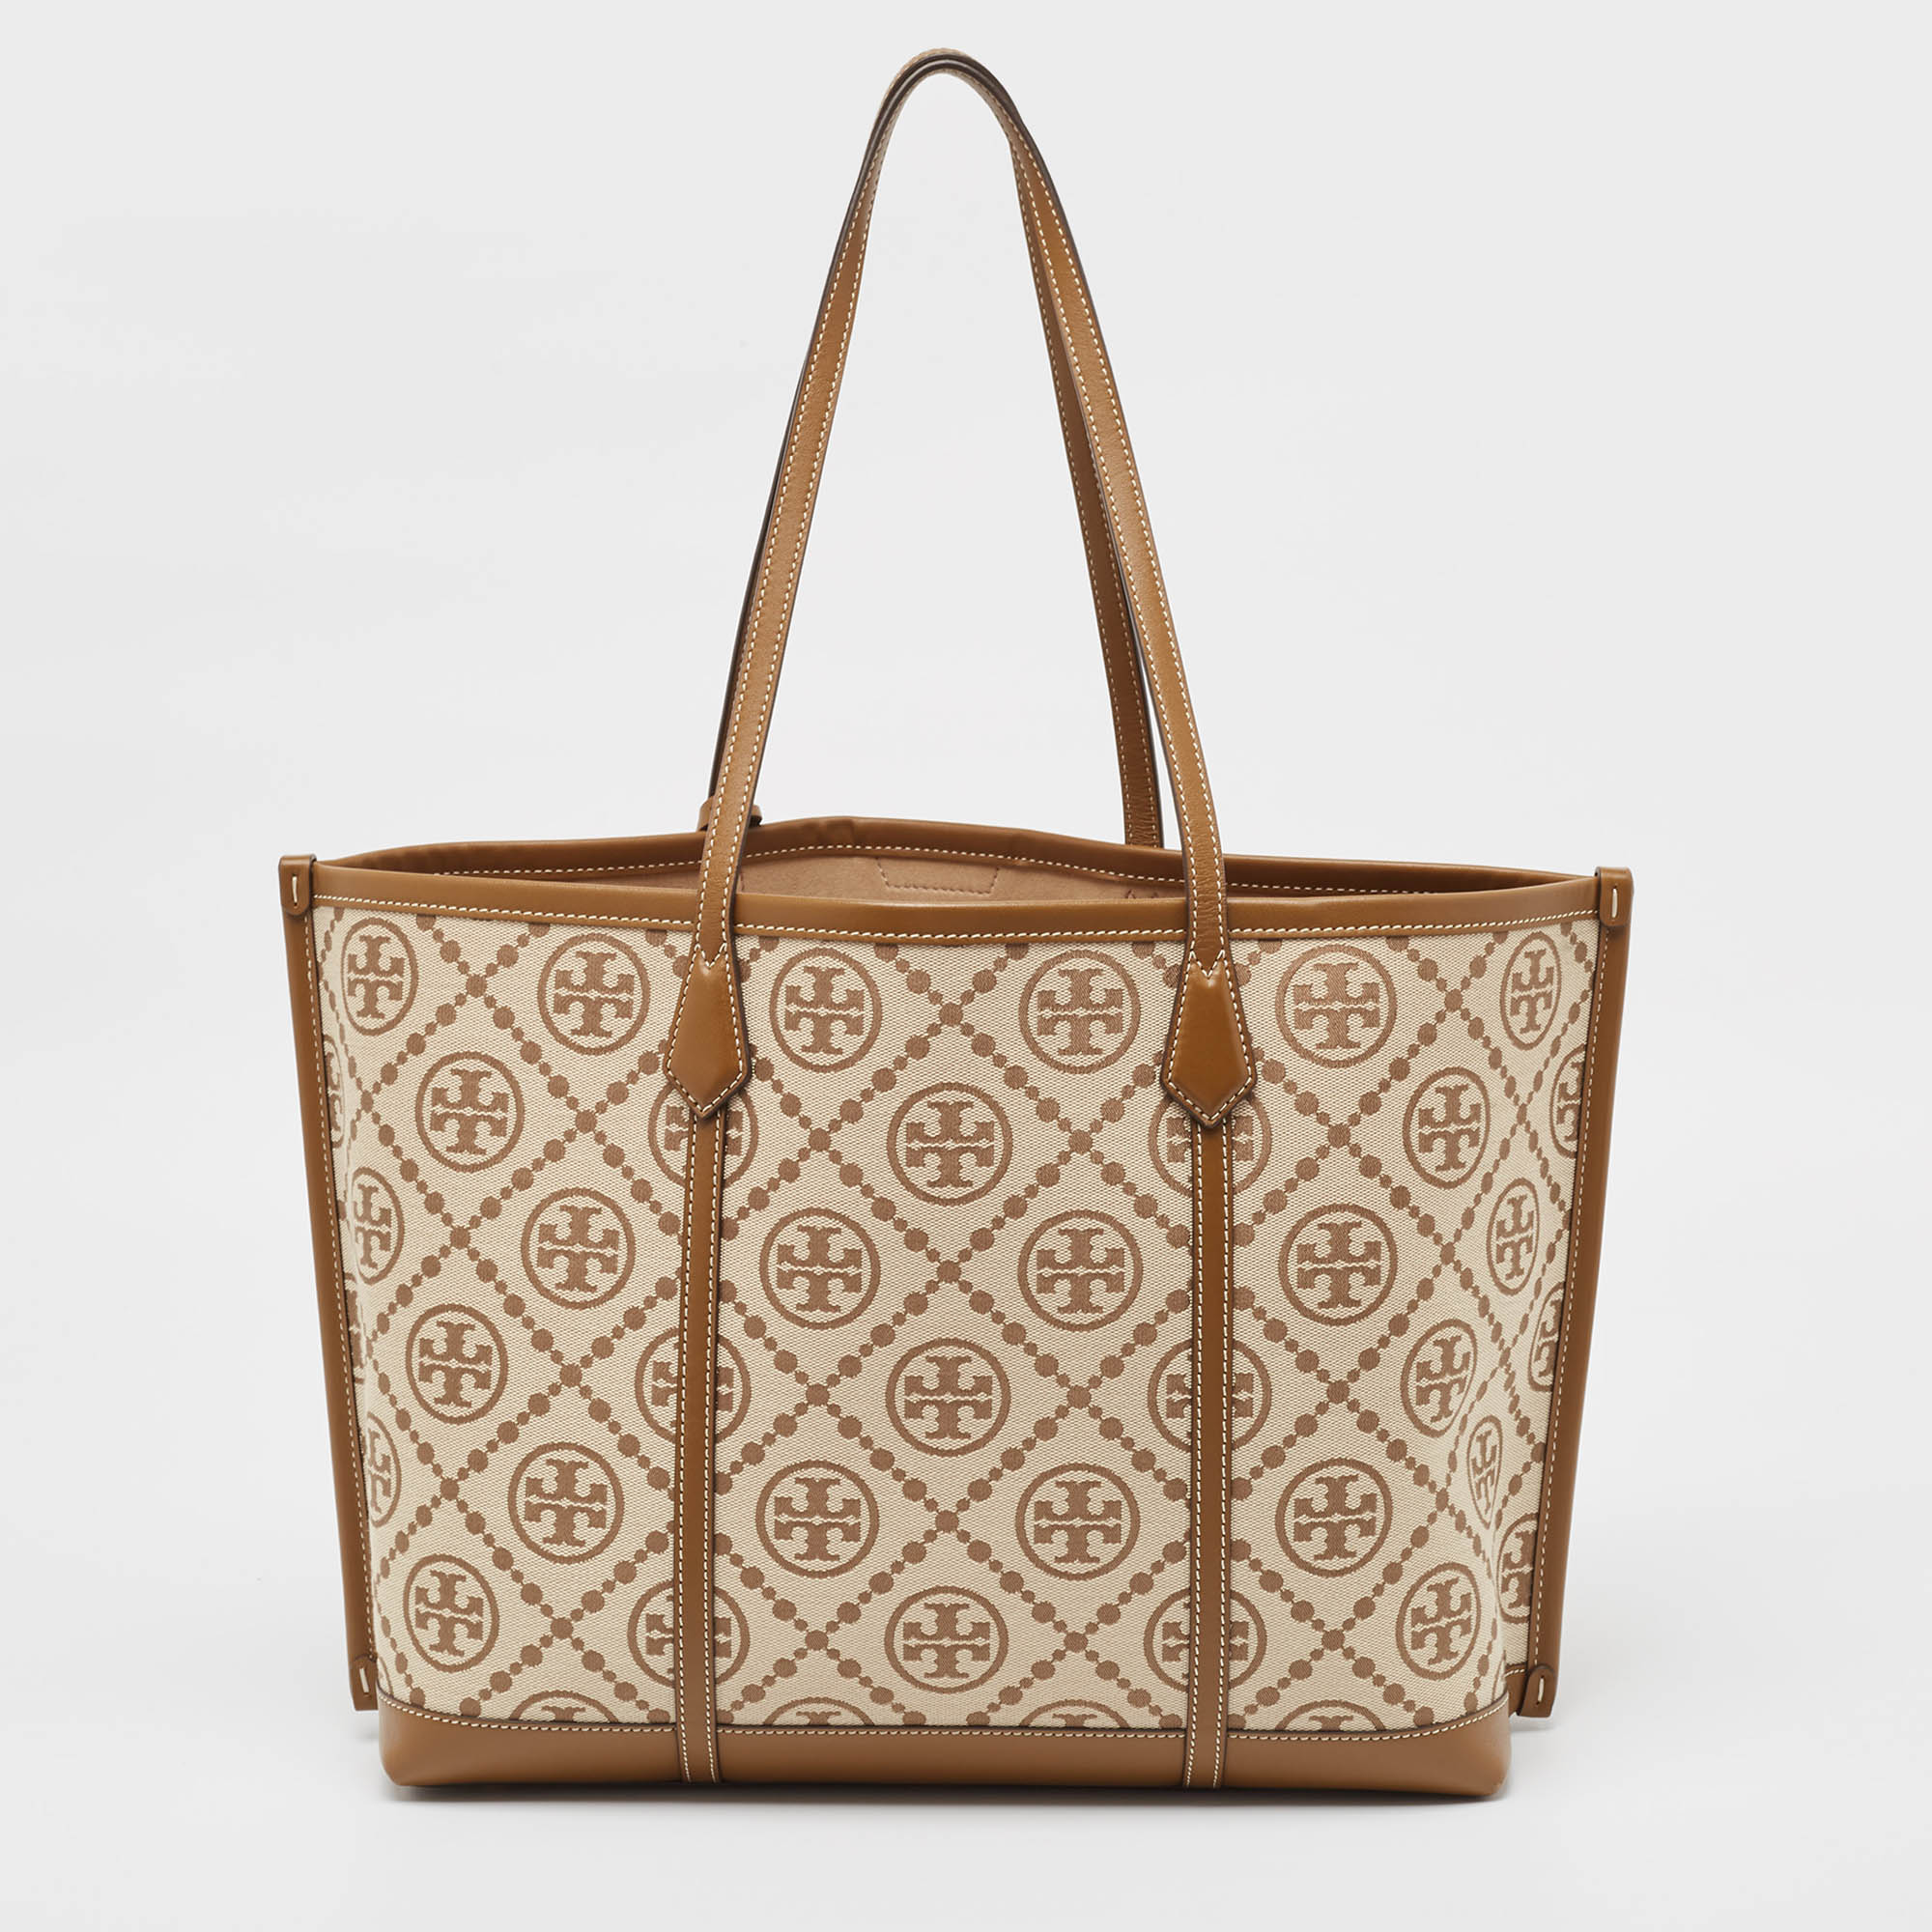 Tory burch tan/beige canvas logo triple-compartment perry tote